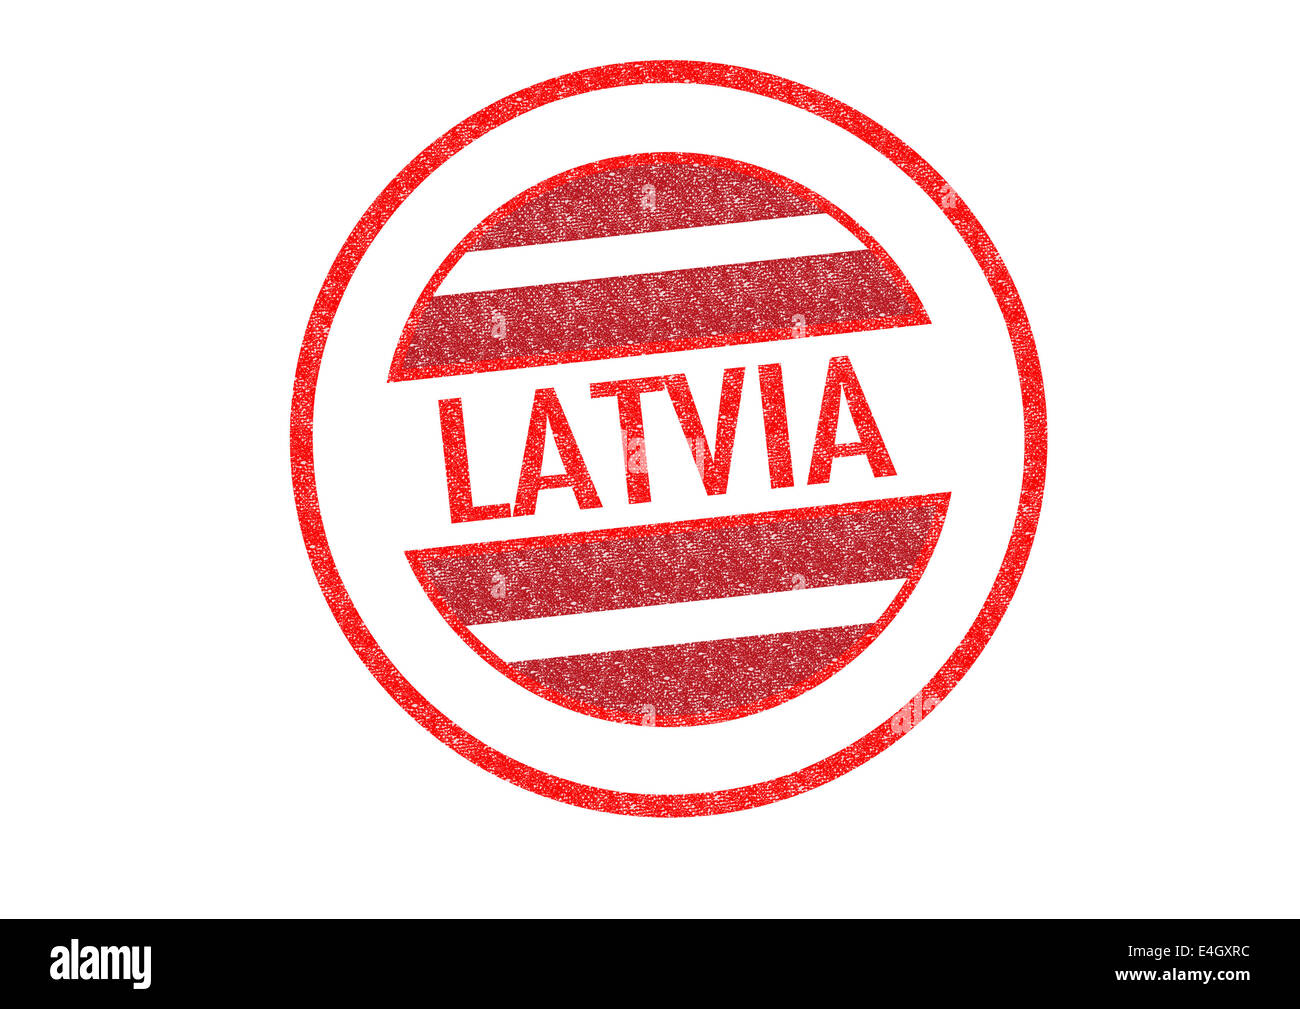 Passport-style LATVIA rubber stamp over a white background. Stock Photo